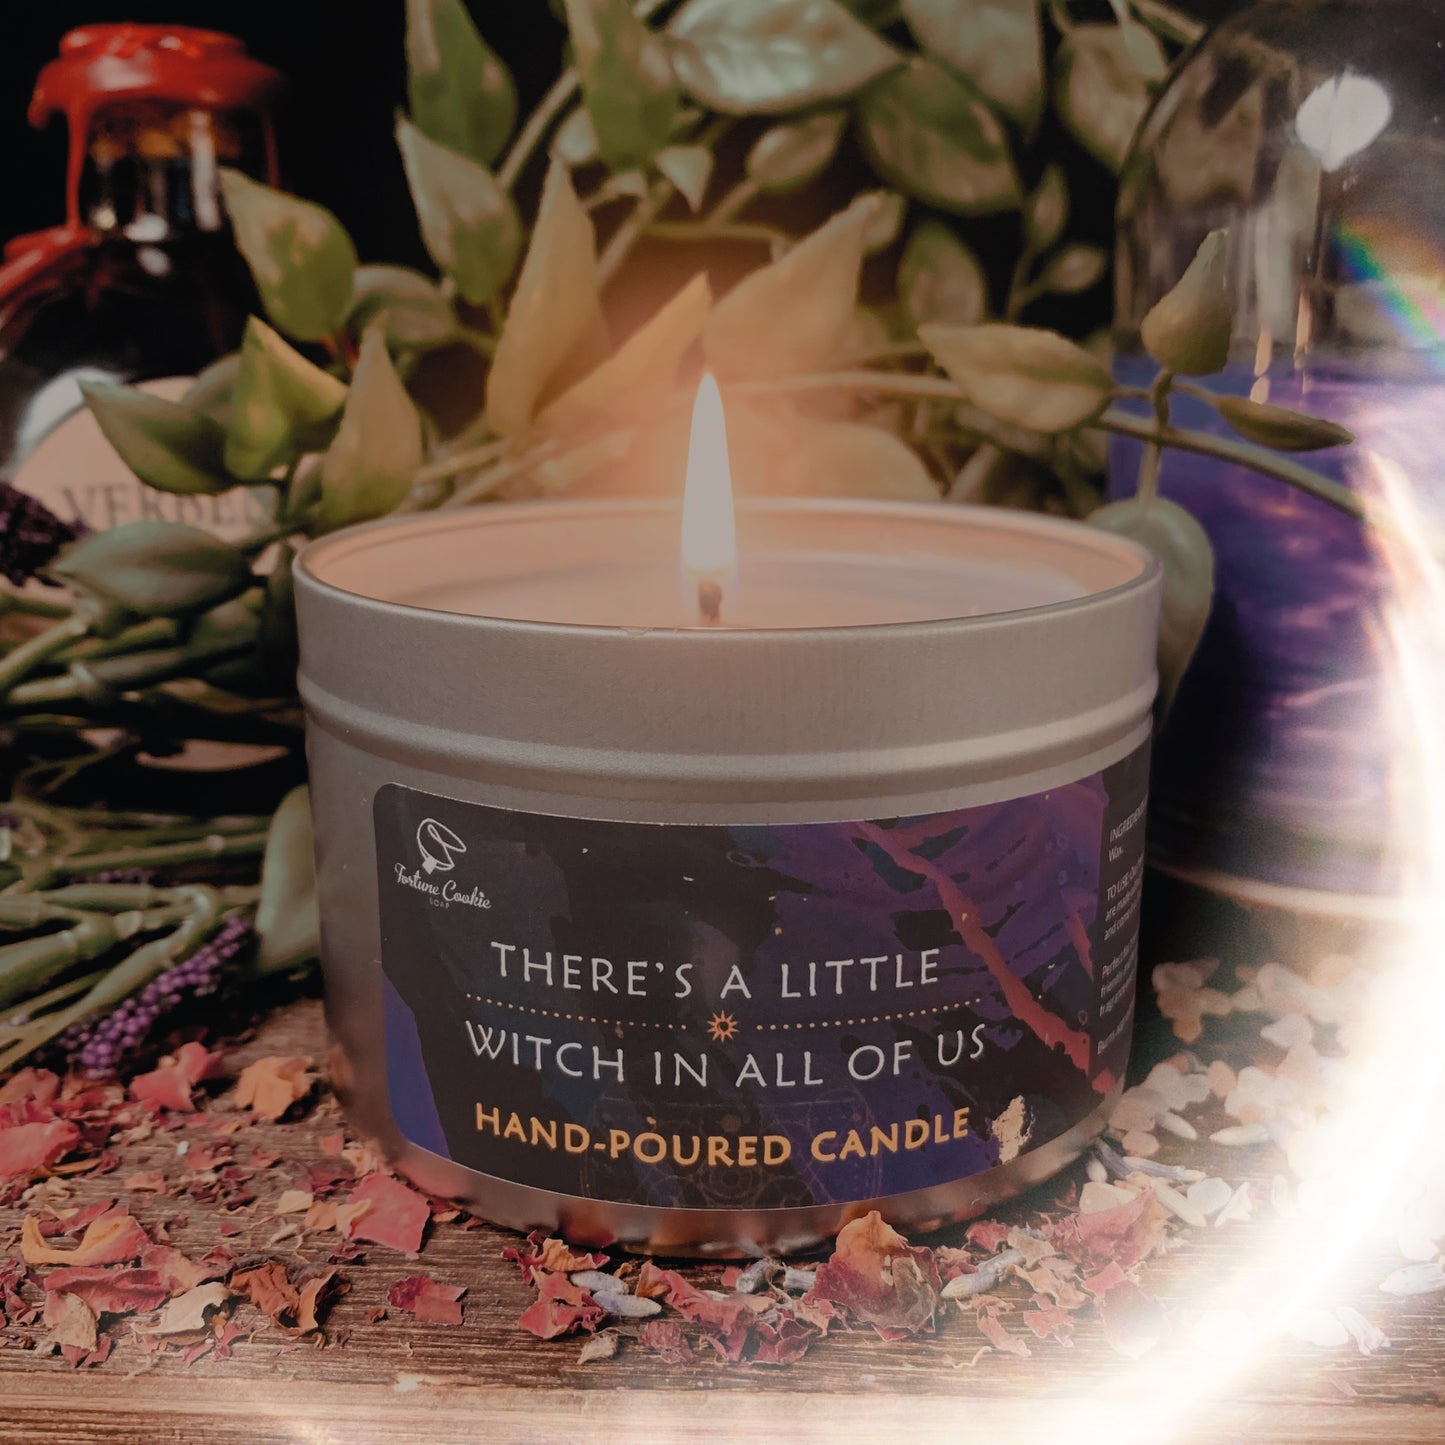 THERE'S A LITTLE WITCH IN ALL OF US Hand-Poured Candle (XL)